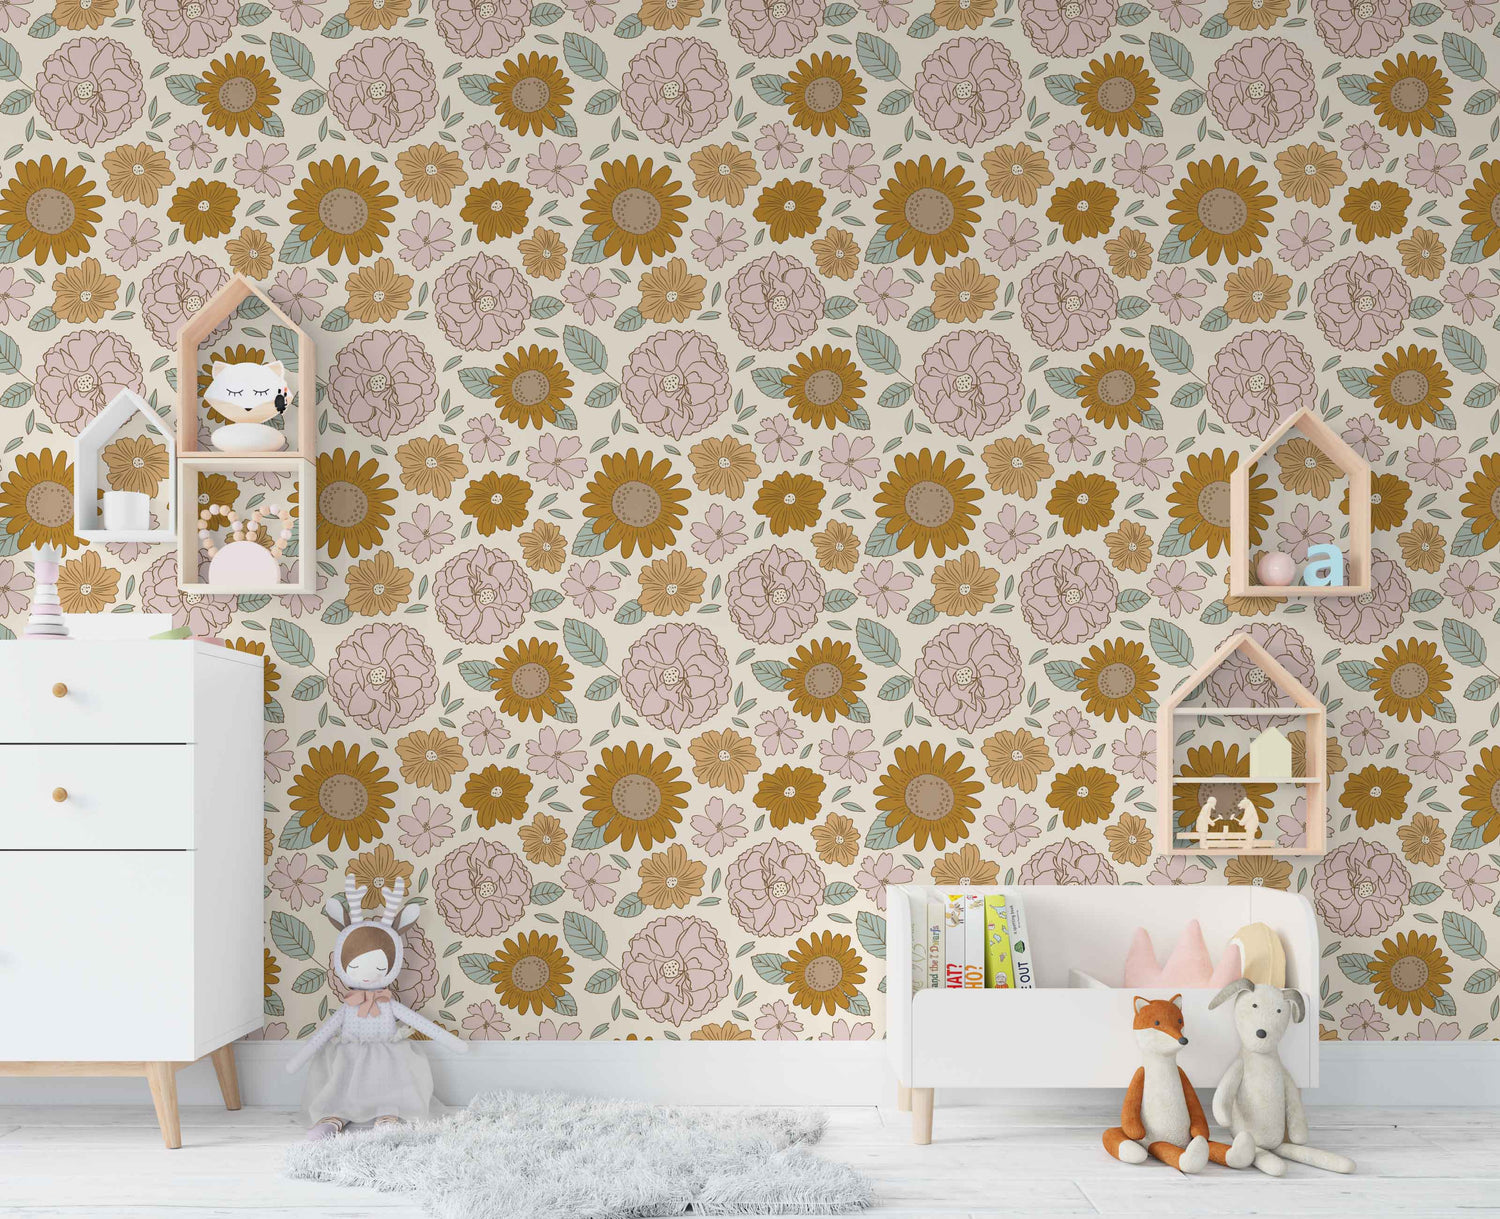 Check Out Our Eco Friendly Wallpaper!